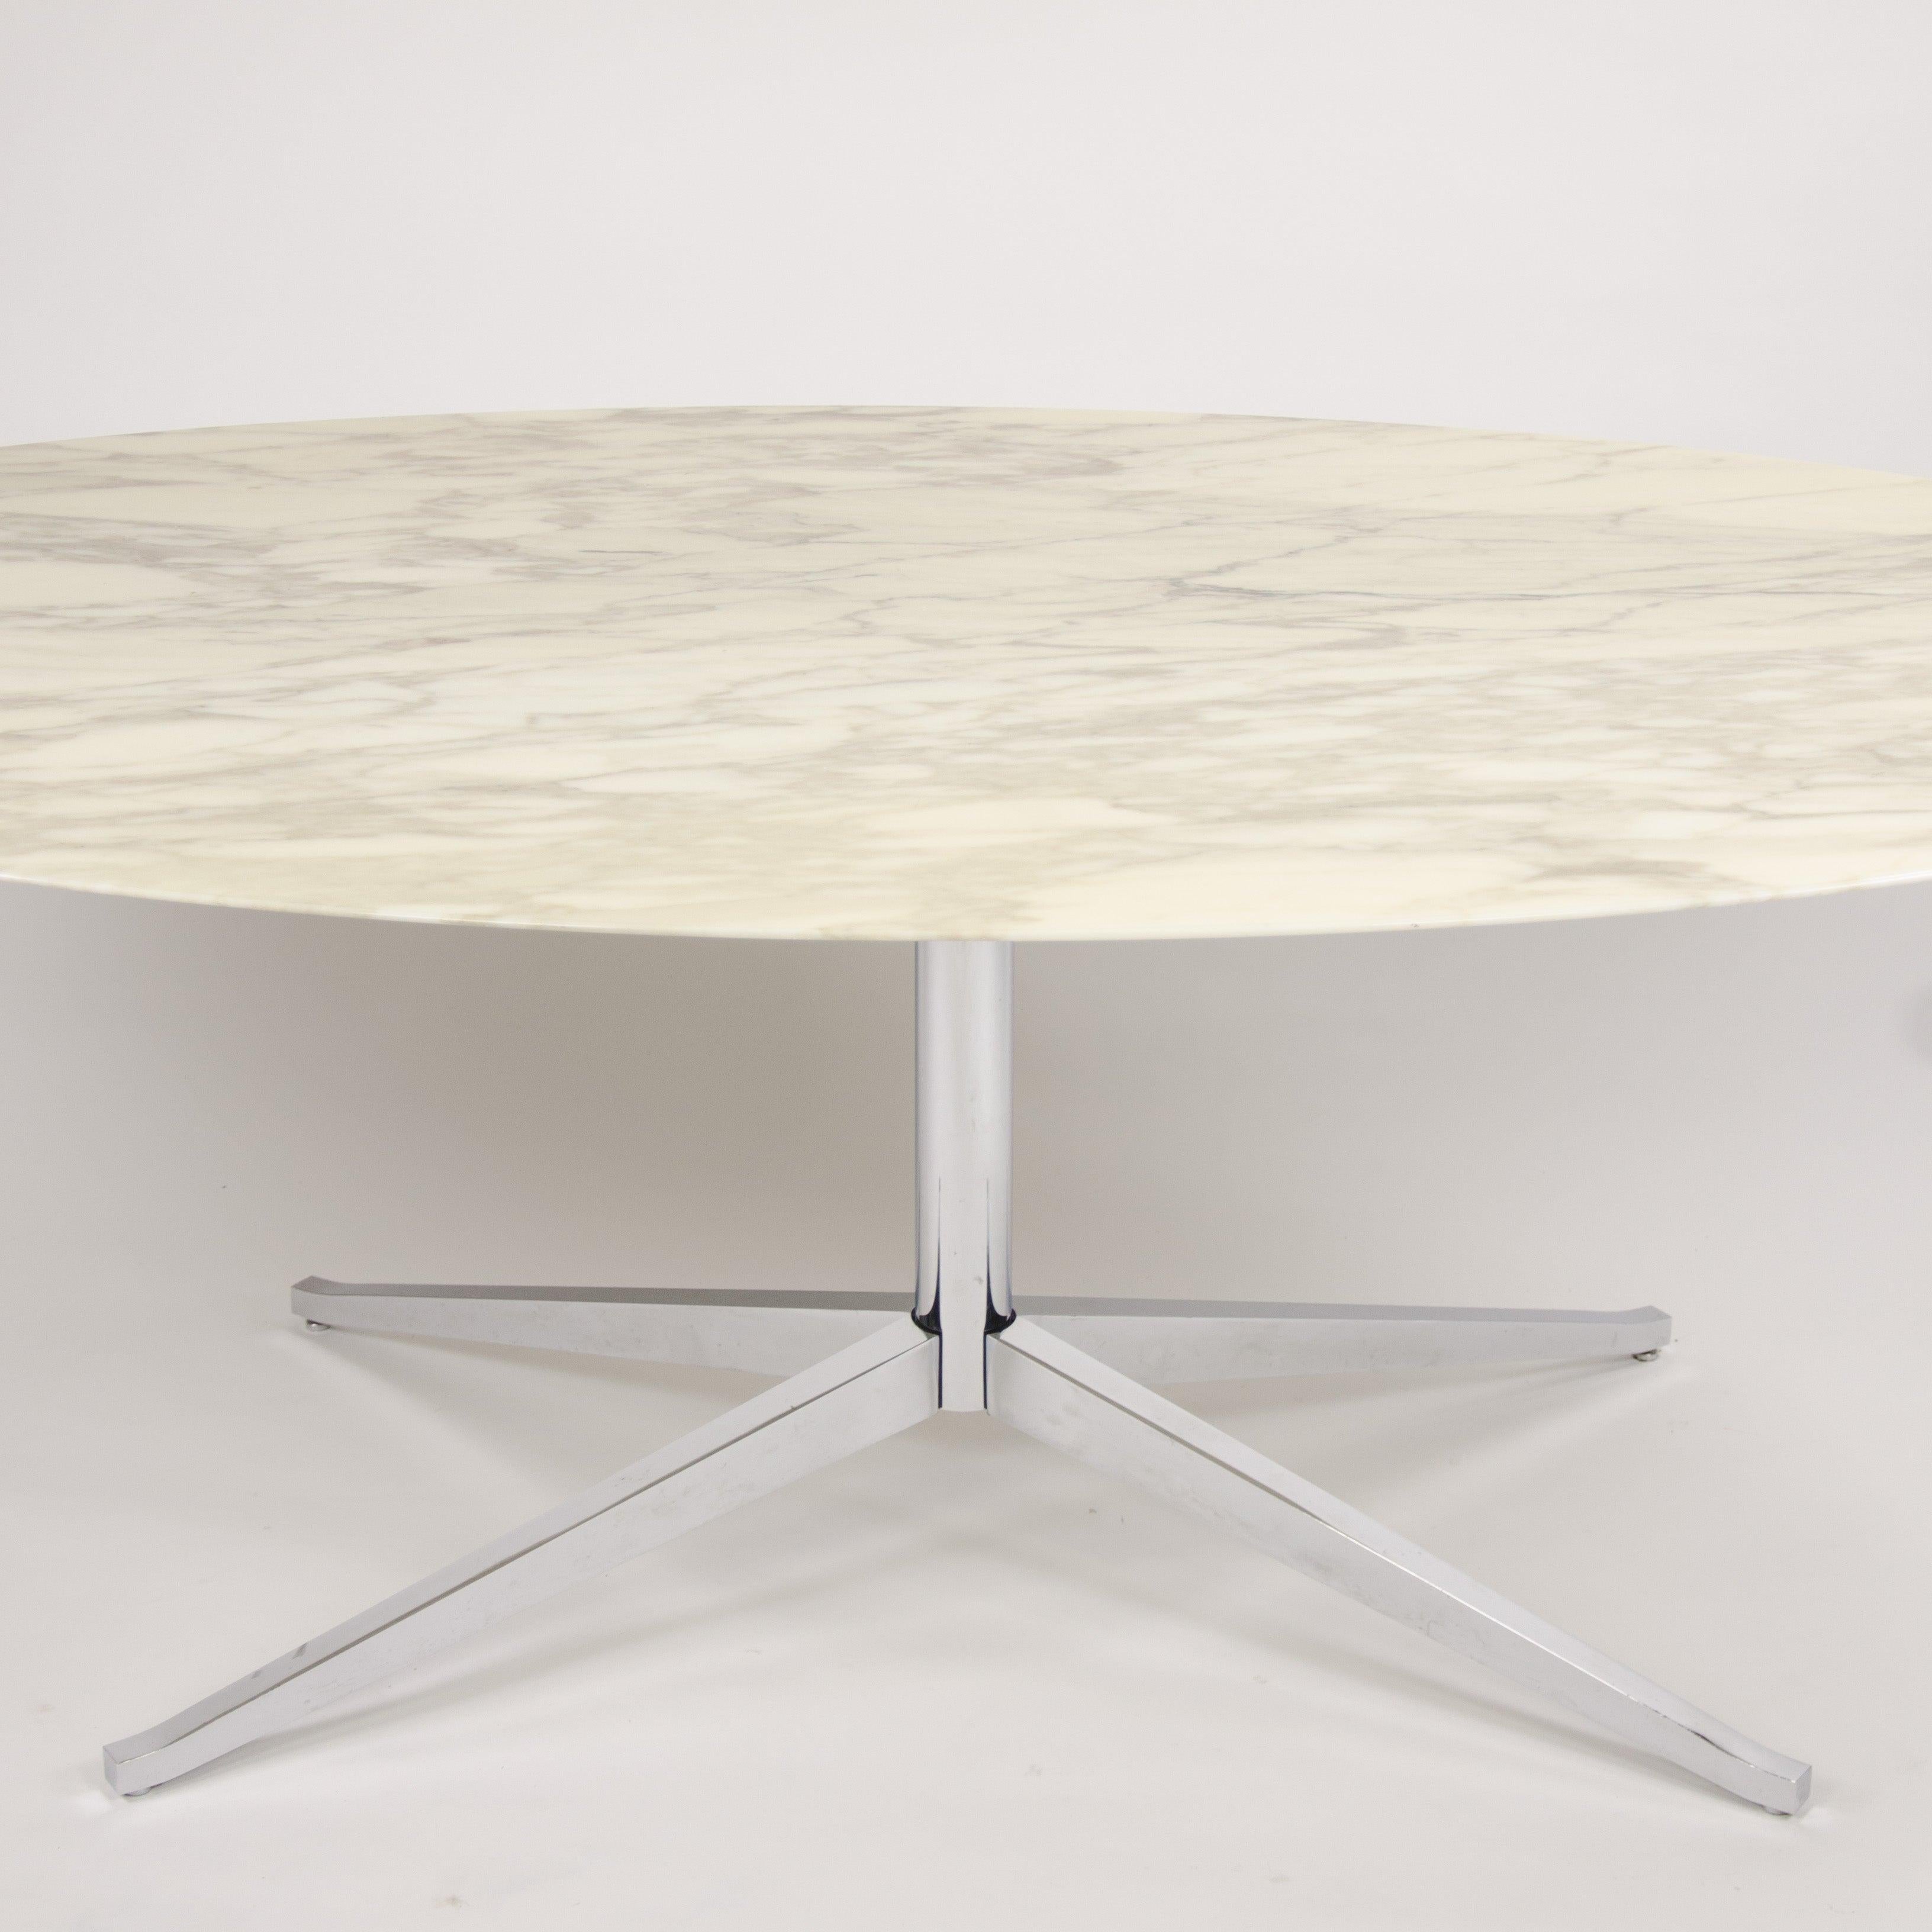 2007 Florence Knoll 78 in Calacatta Marble Dining Conference Table 2x Available Bon état - En vente à Philadelphia, PA